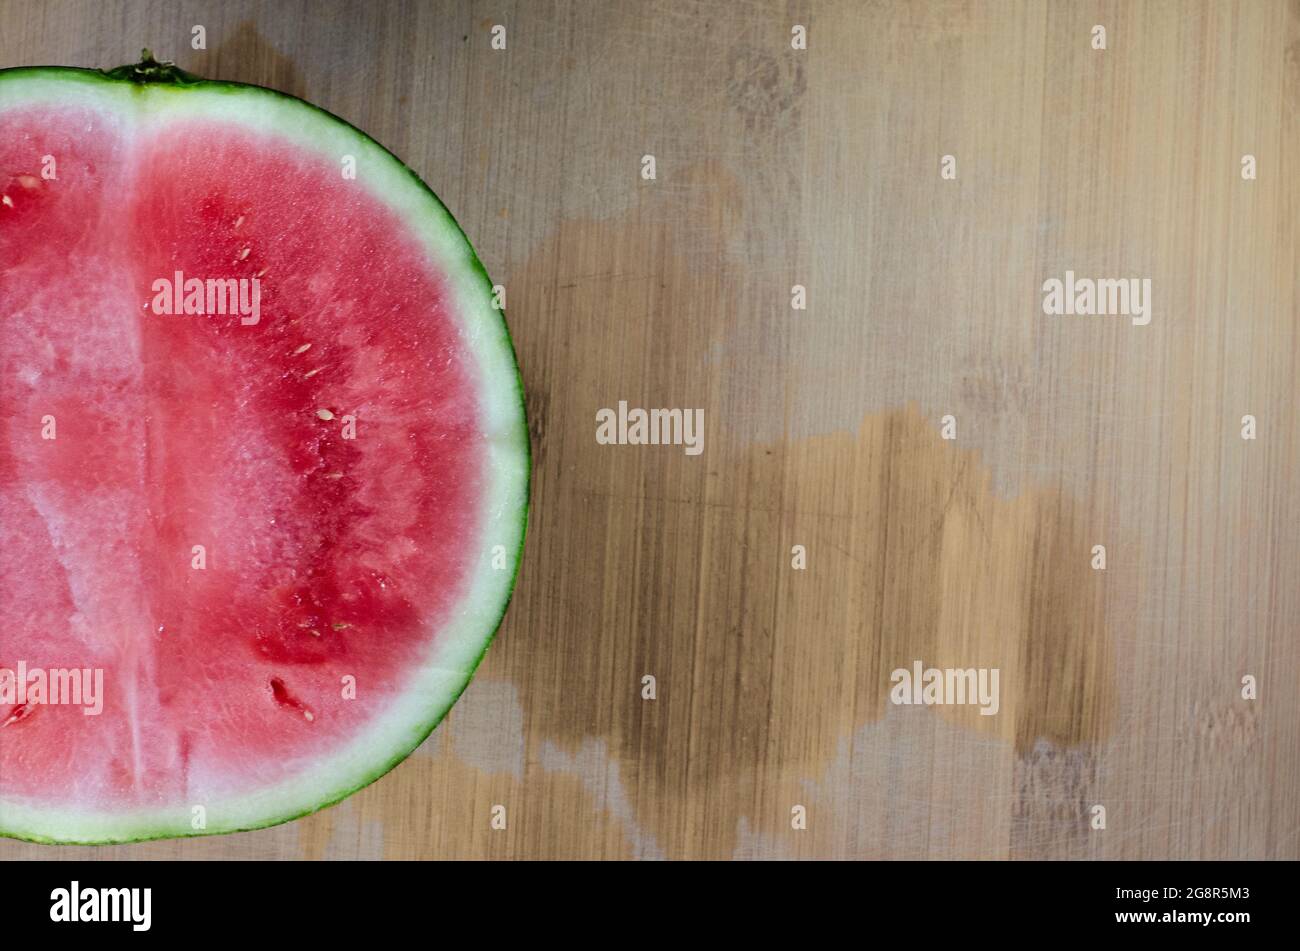 half of a watermelon in one corner and a wooden table at the bottom. Stock Photo